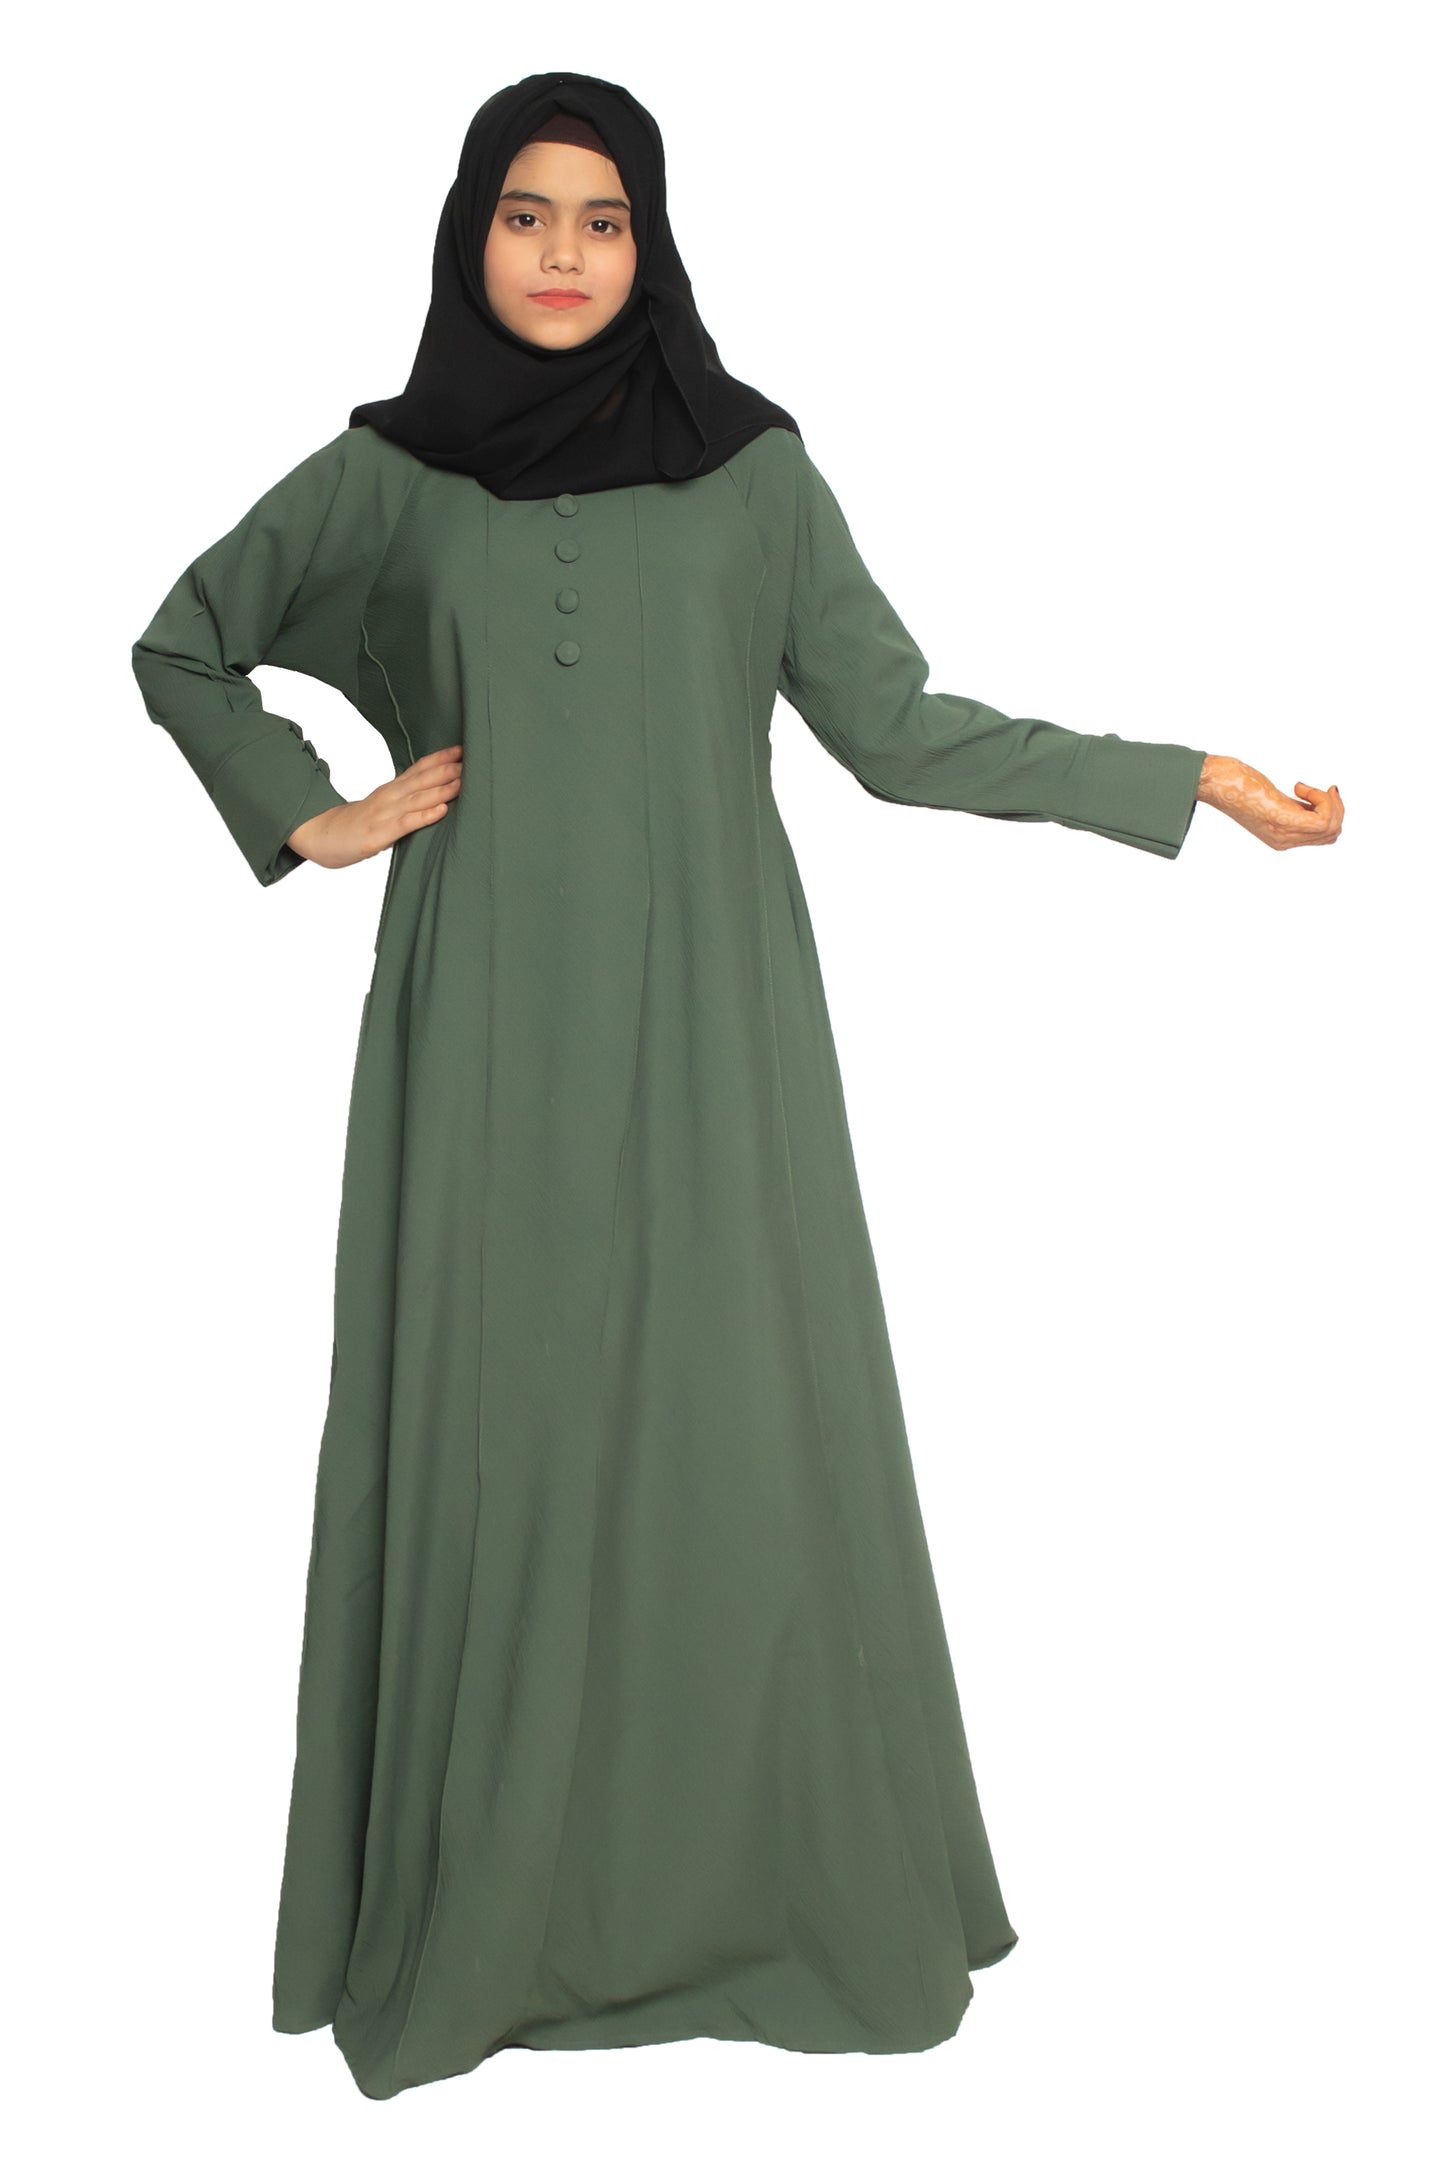 Modest City Self Design Plain Parrot Green Front 4 Button Abaya or Burqa With Hijab for Women & Girls-Series Laiba